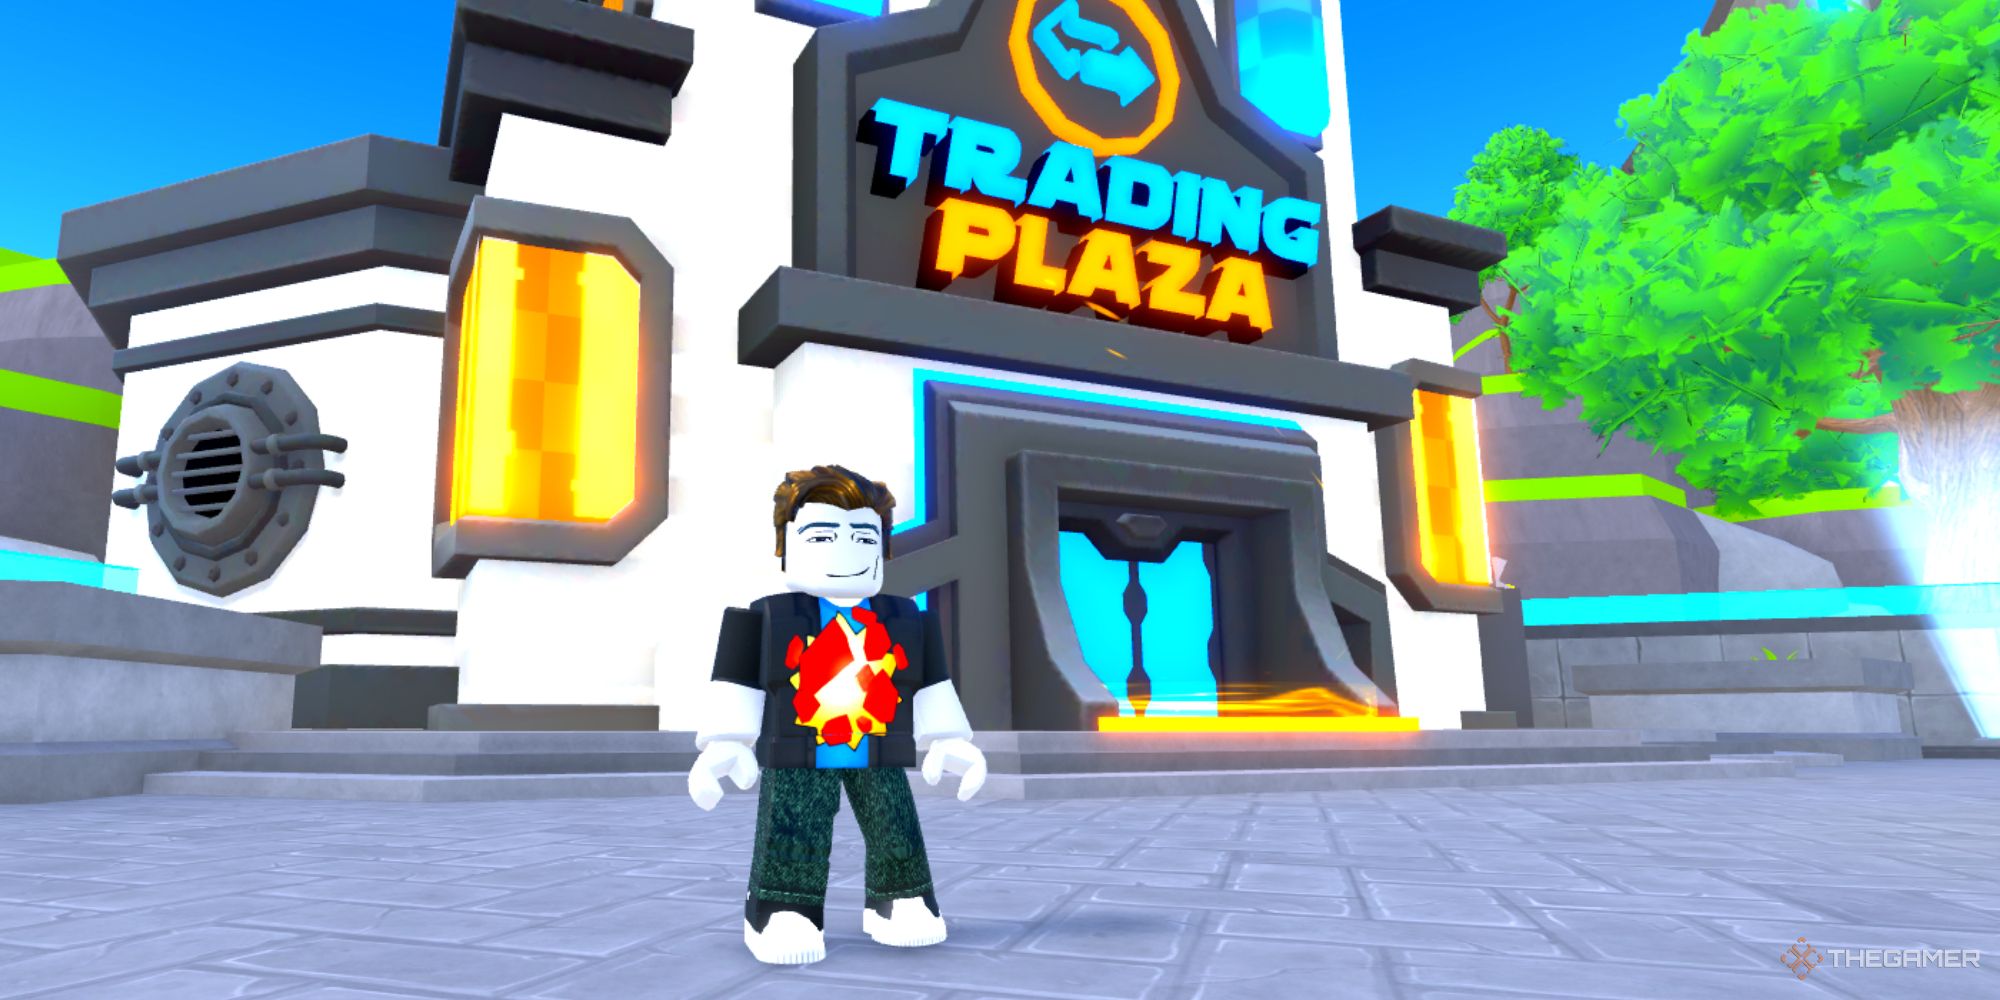 A screenshot from Roblox: Toilet Tower Defense showing a player character standing outside of the Trading Plaza.